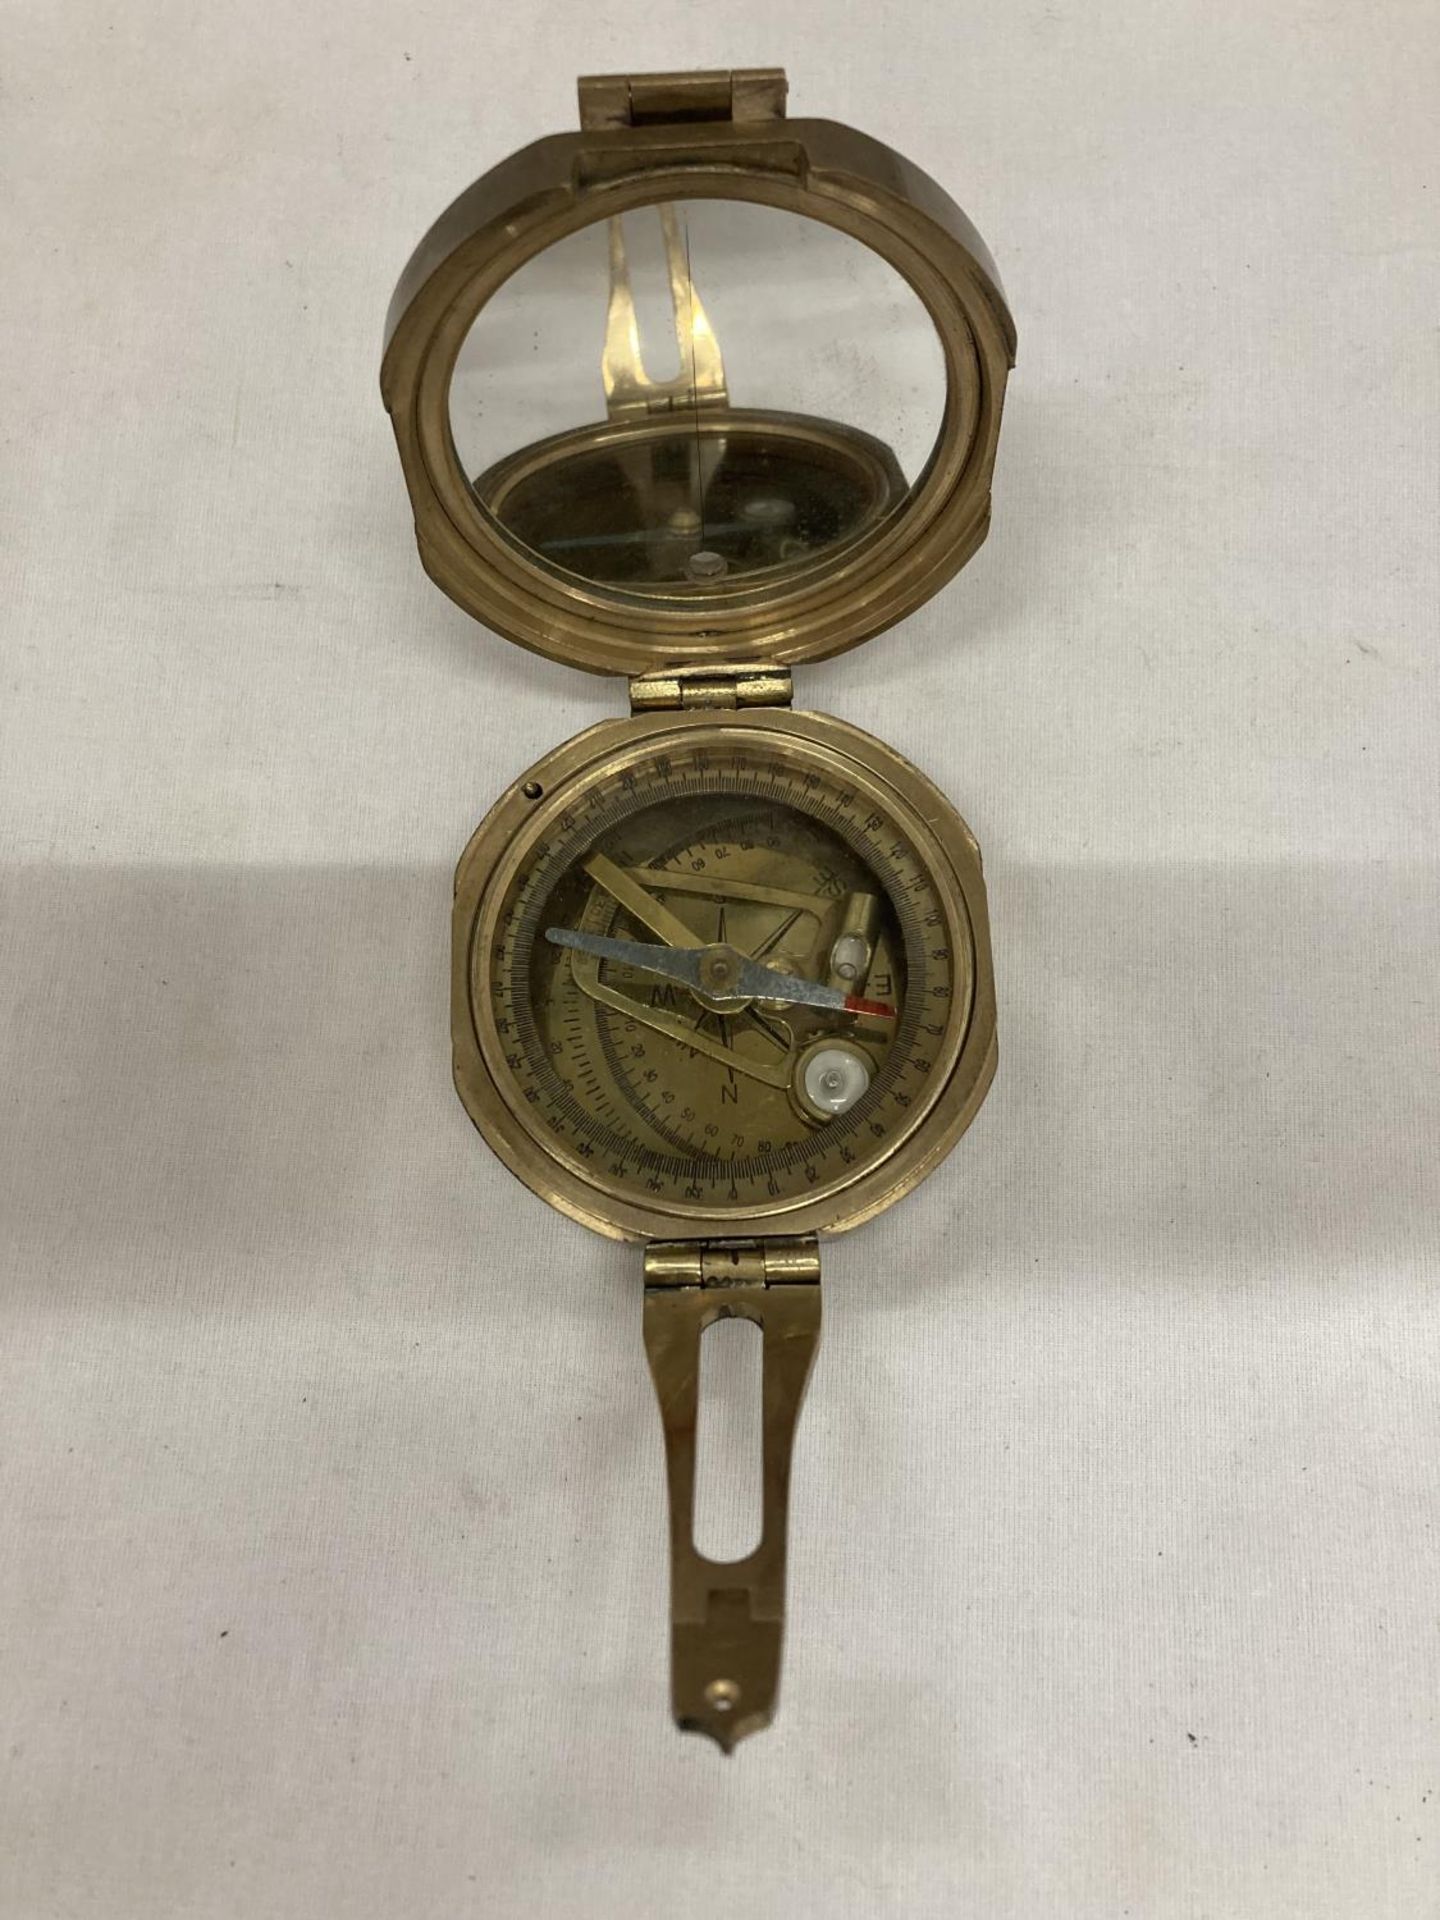 A POLISHED BRASS BRUNTON STYLE EXPLORERS' COMPASS